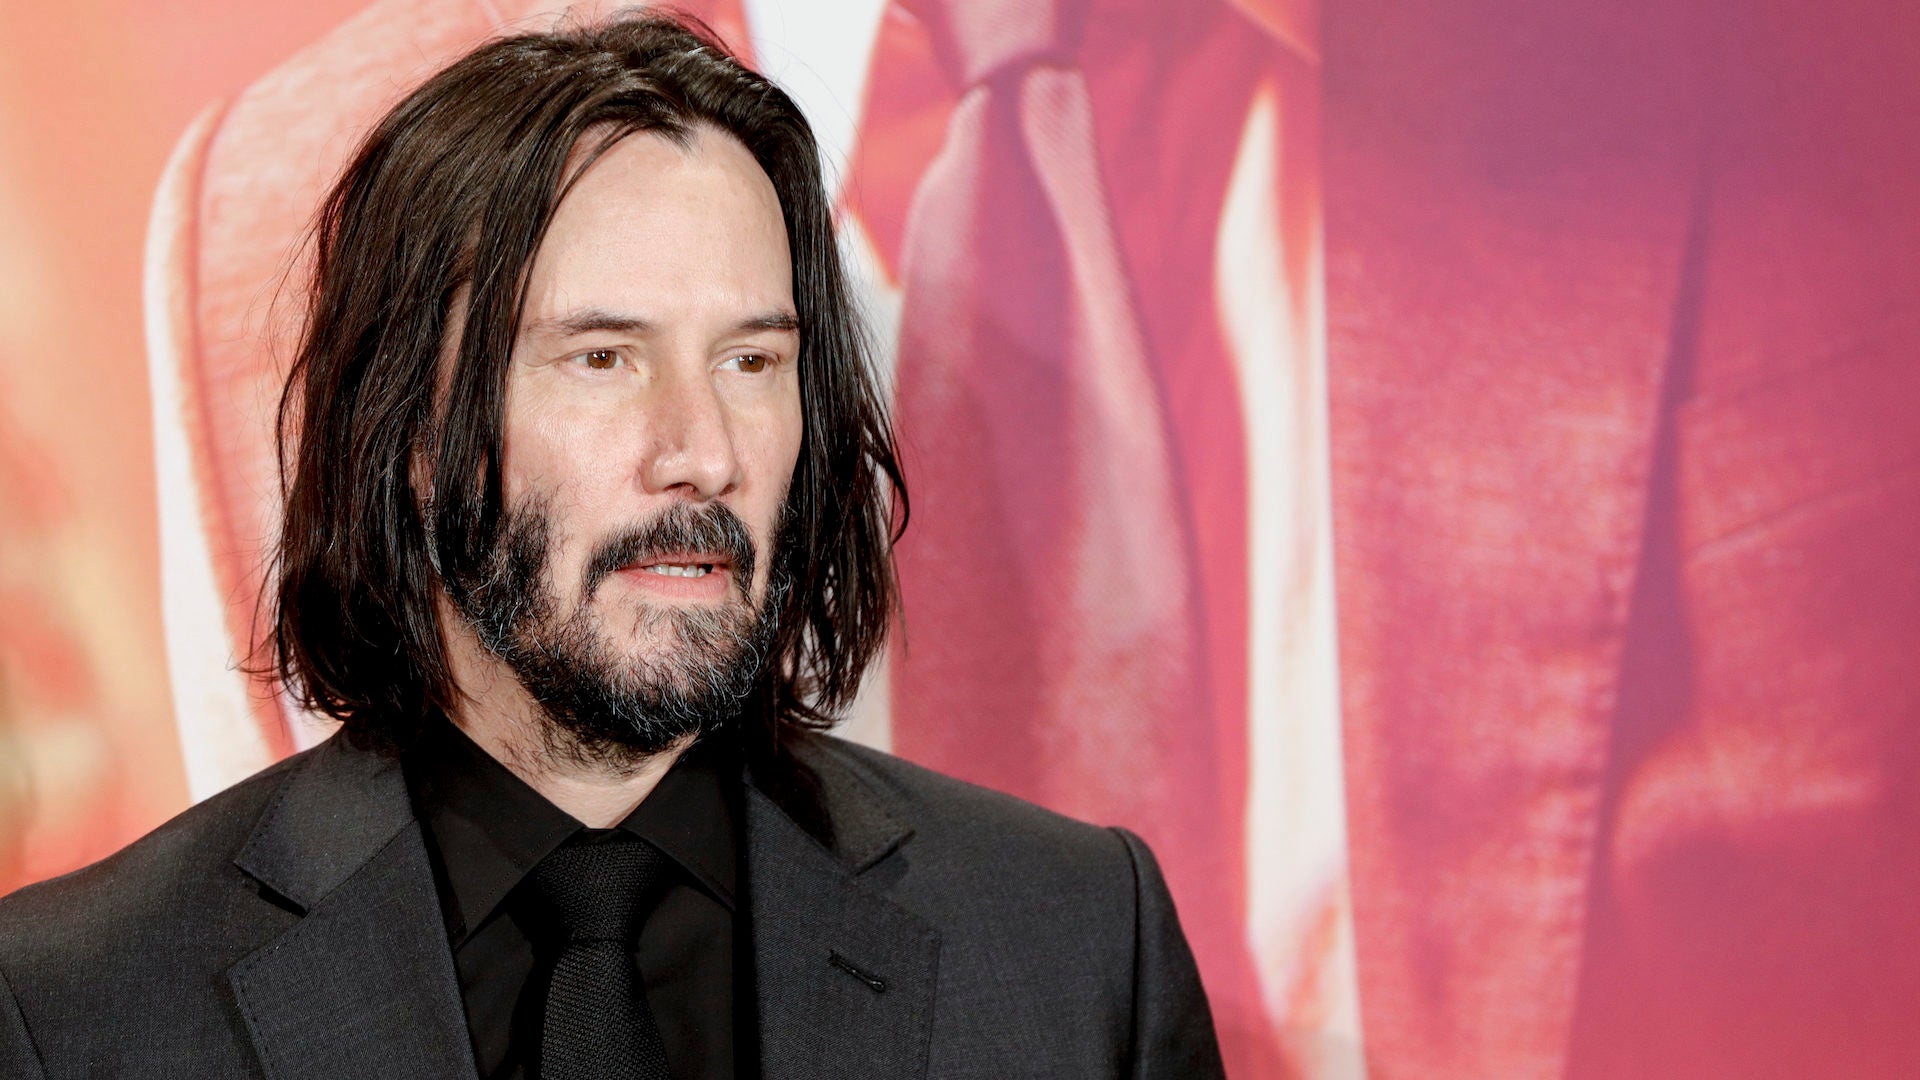 keanu reeves is a proud person of color, but doesn't want to